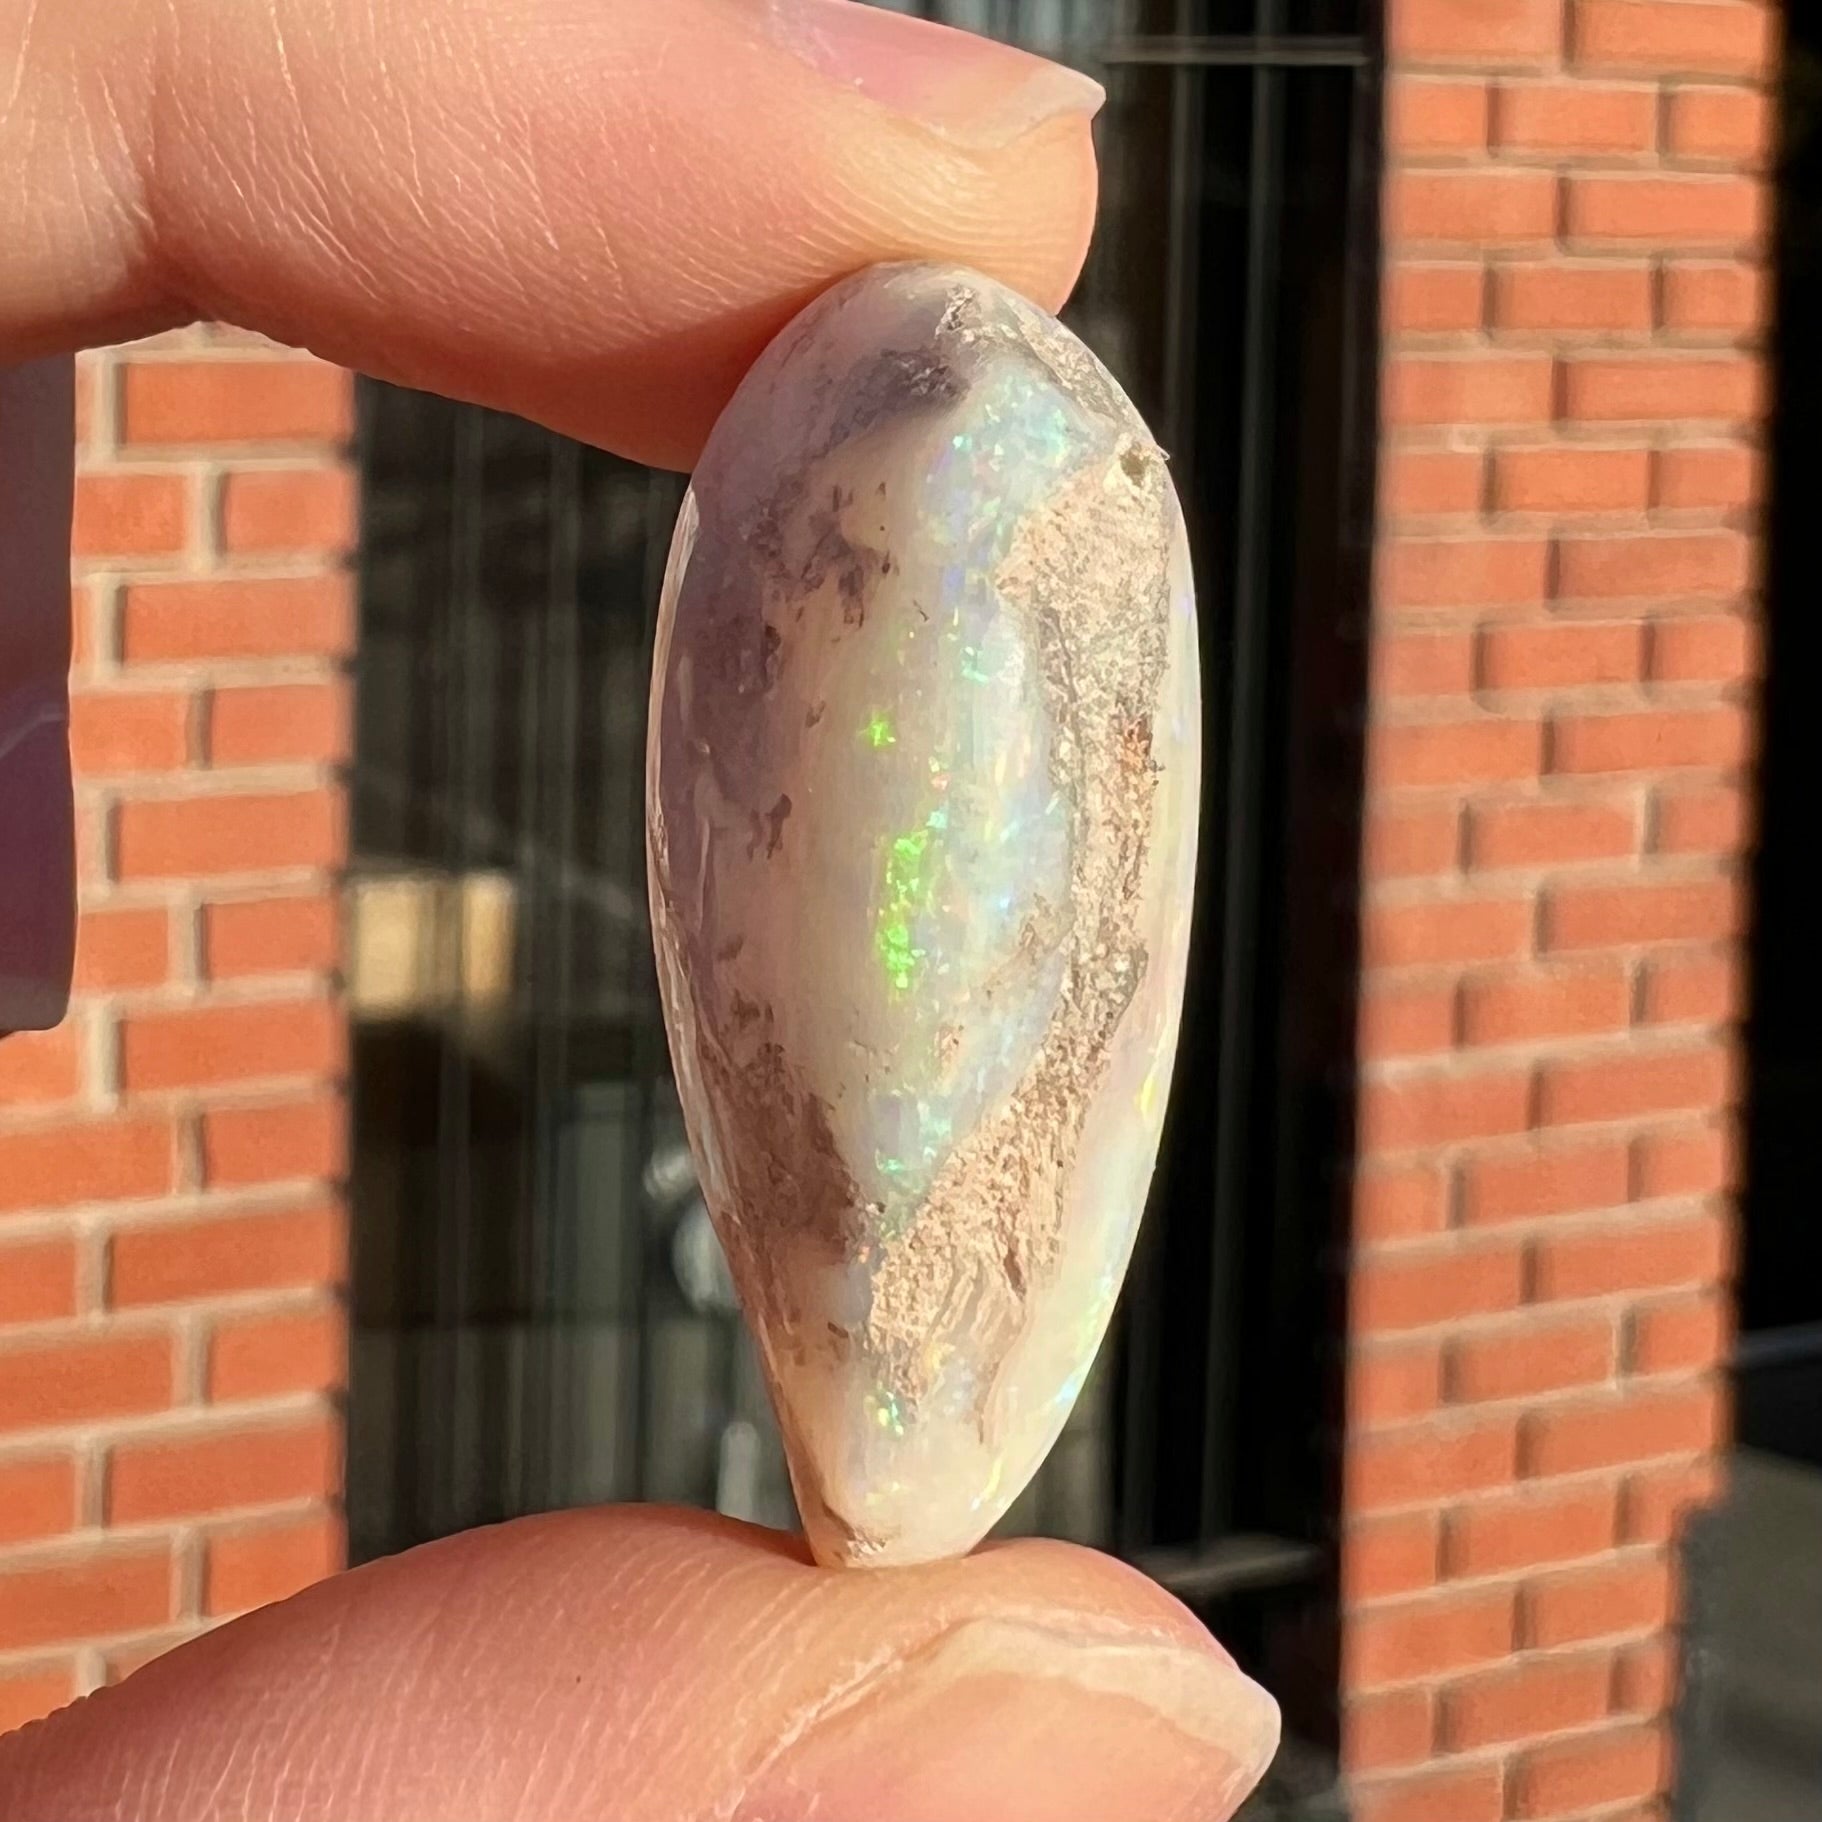 An opalized seashell fossil that displays play of color.  The full color spectrum is visible, including red, green, blue, and purple.